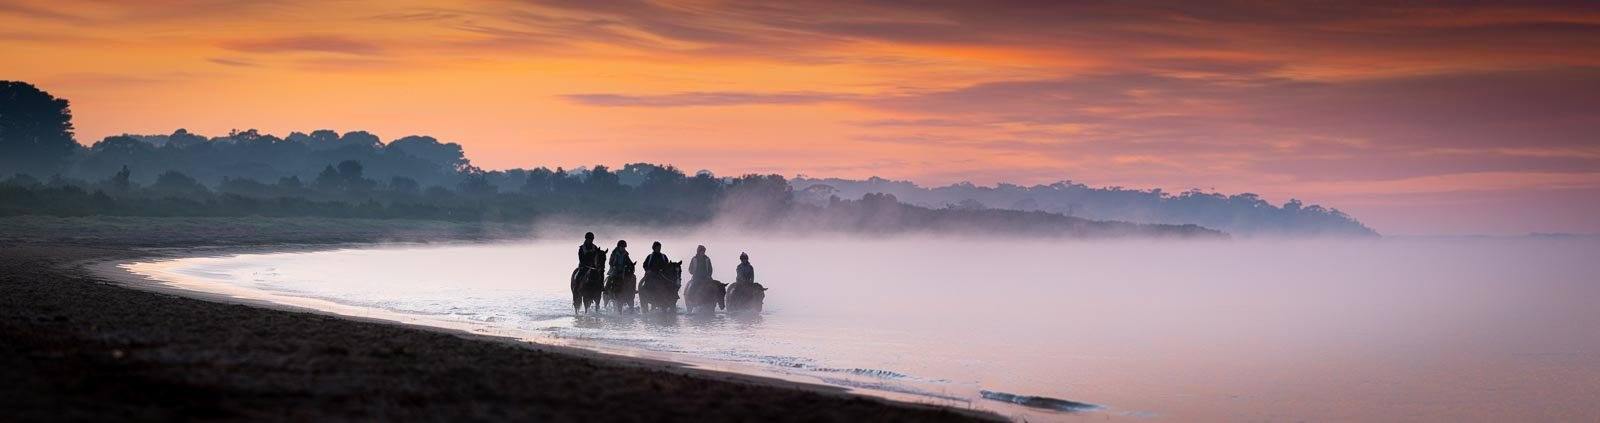 A landscape shot of five horses with horsemen riding on them, standing in a row with the feet of horses underwater, and some fog in the background, Balnarring Horses 16 - Mornington Peninsula Victoria  